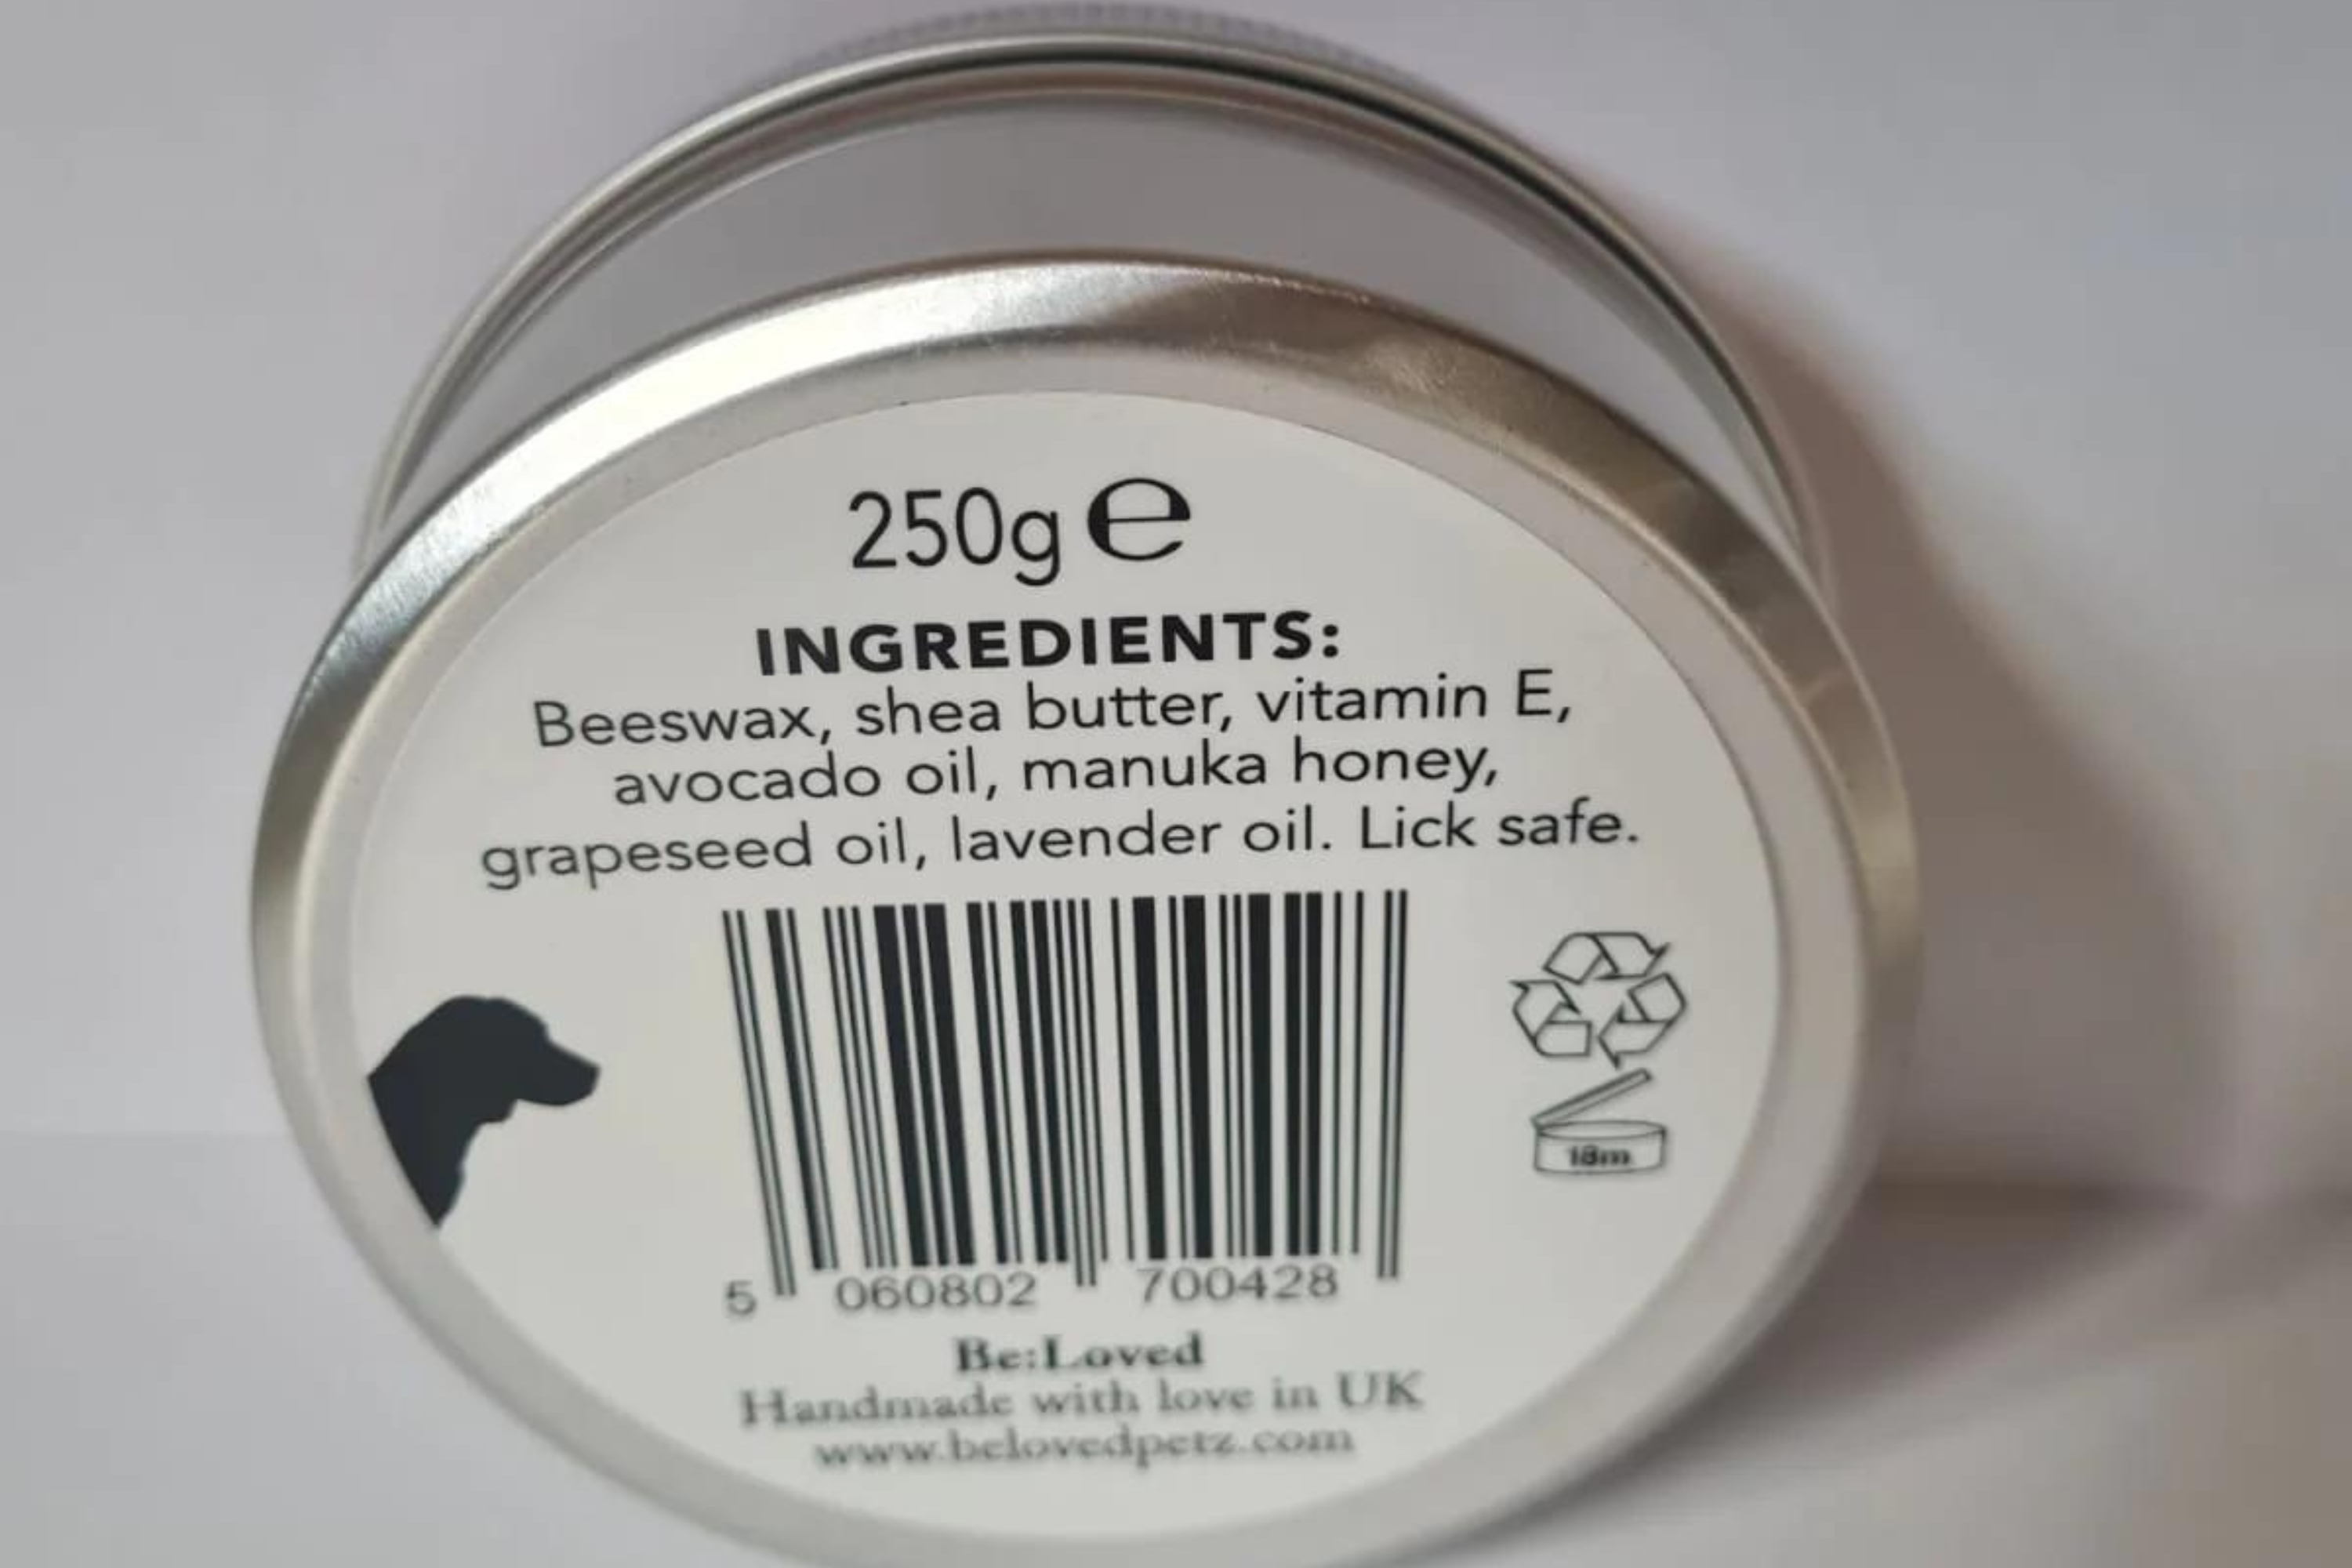 Be:Sunsafe & Be:Soft Pet Paw & Nose Balms – now in an even bigger size!